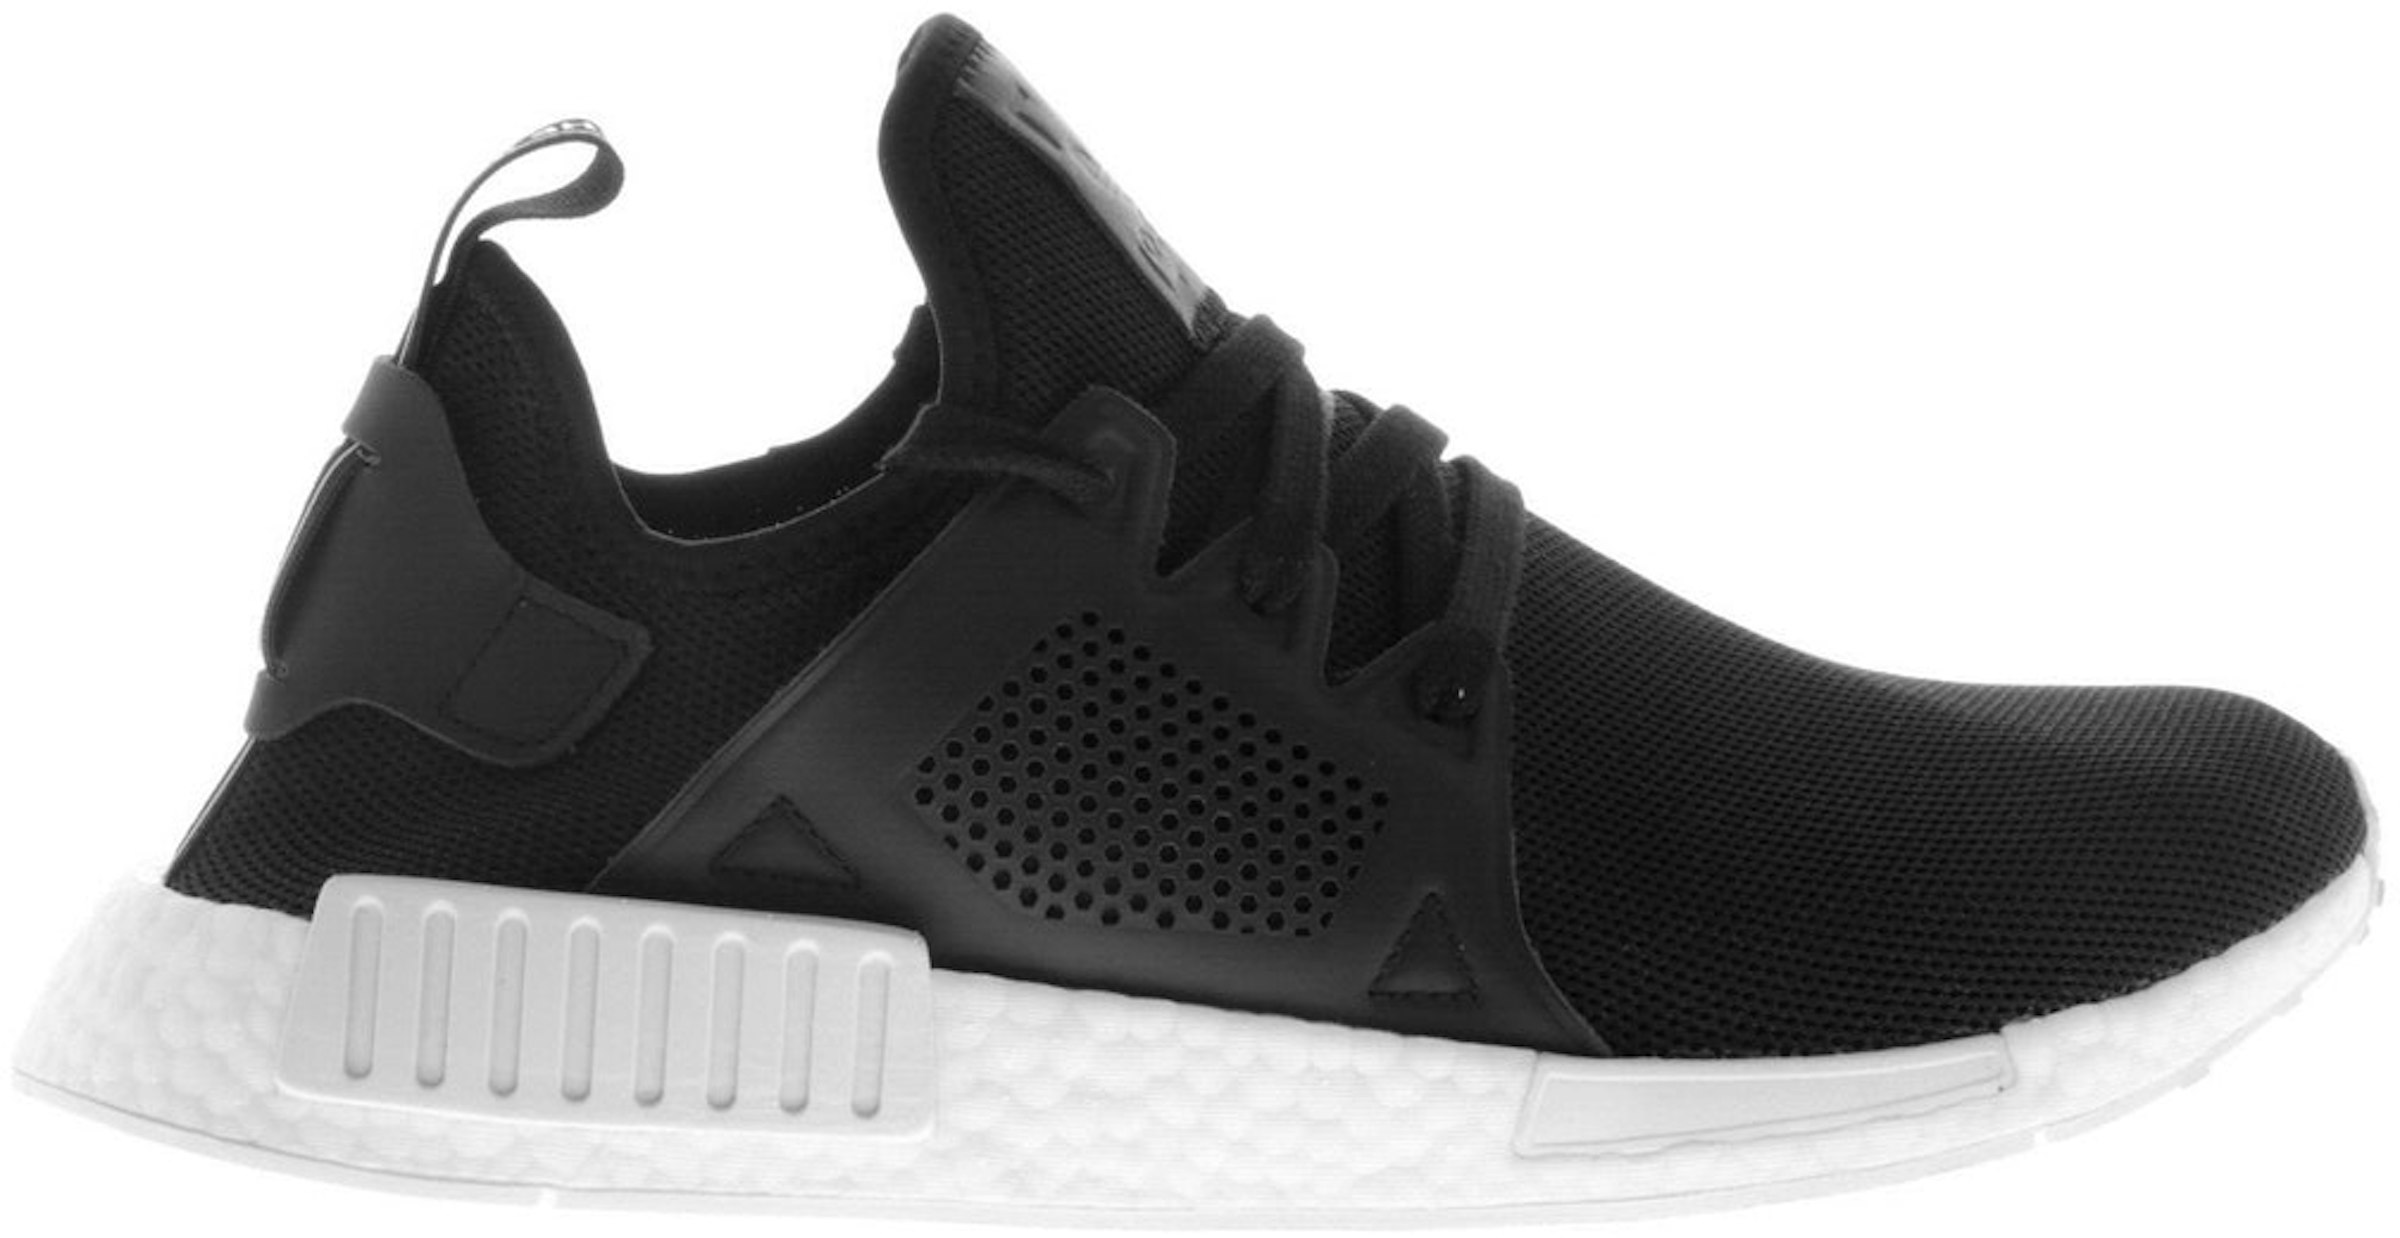 adidas NMD Black White Men's - BY9921 - US